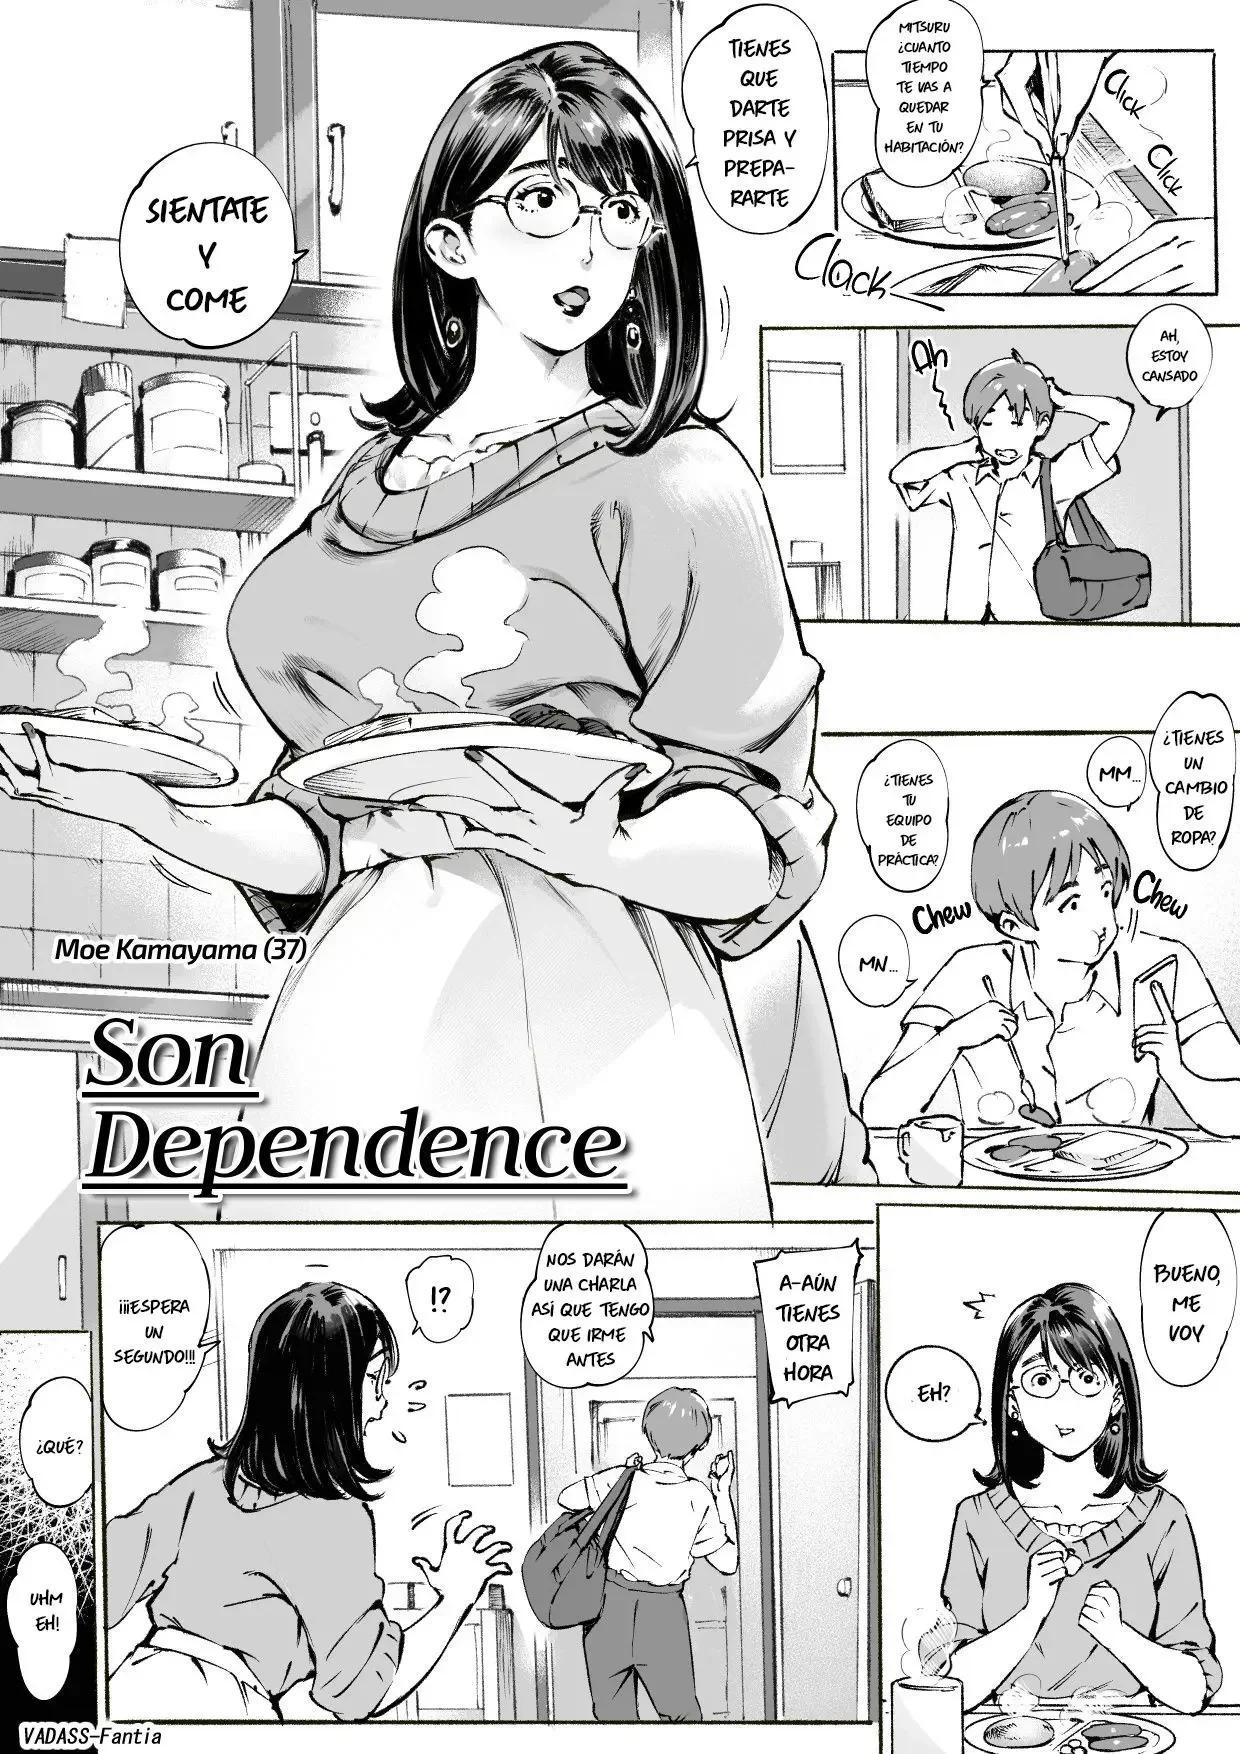 Son Dependence - 0